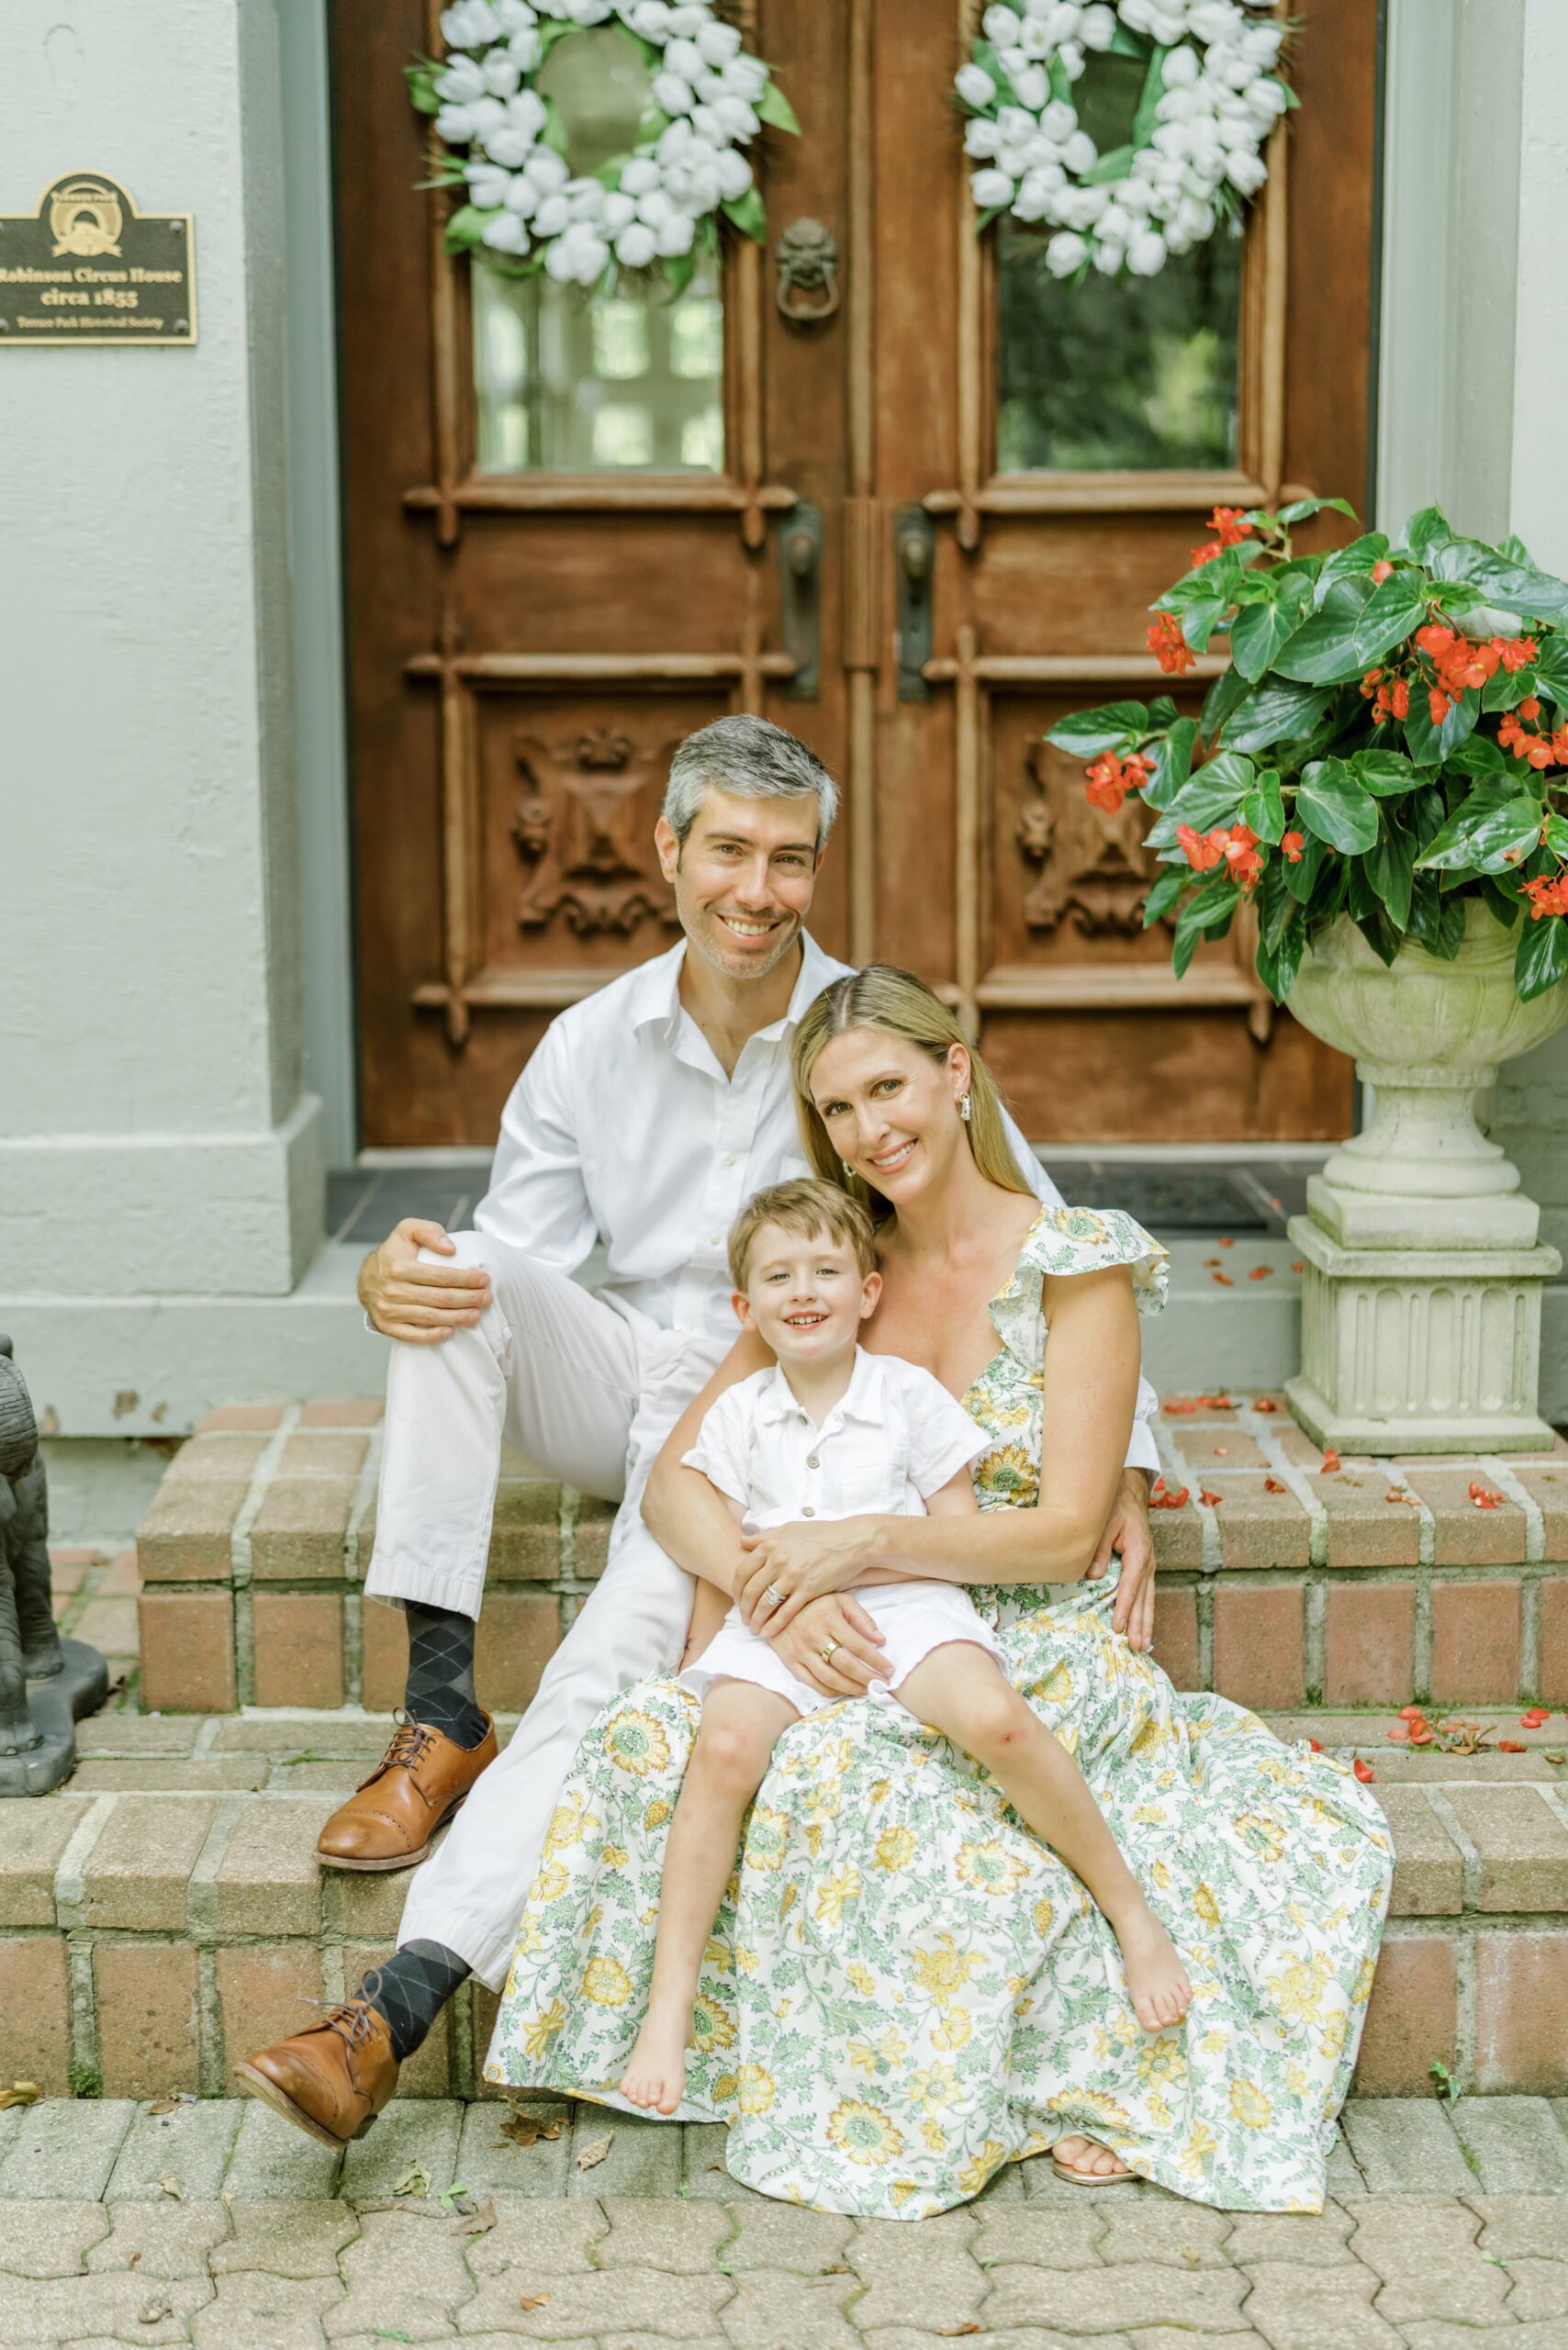 Mom, dad, and son sit on the front porch of their home during photo session